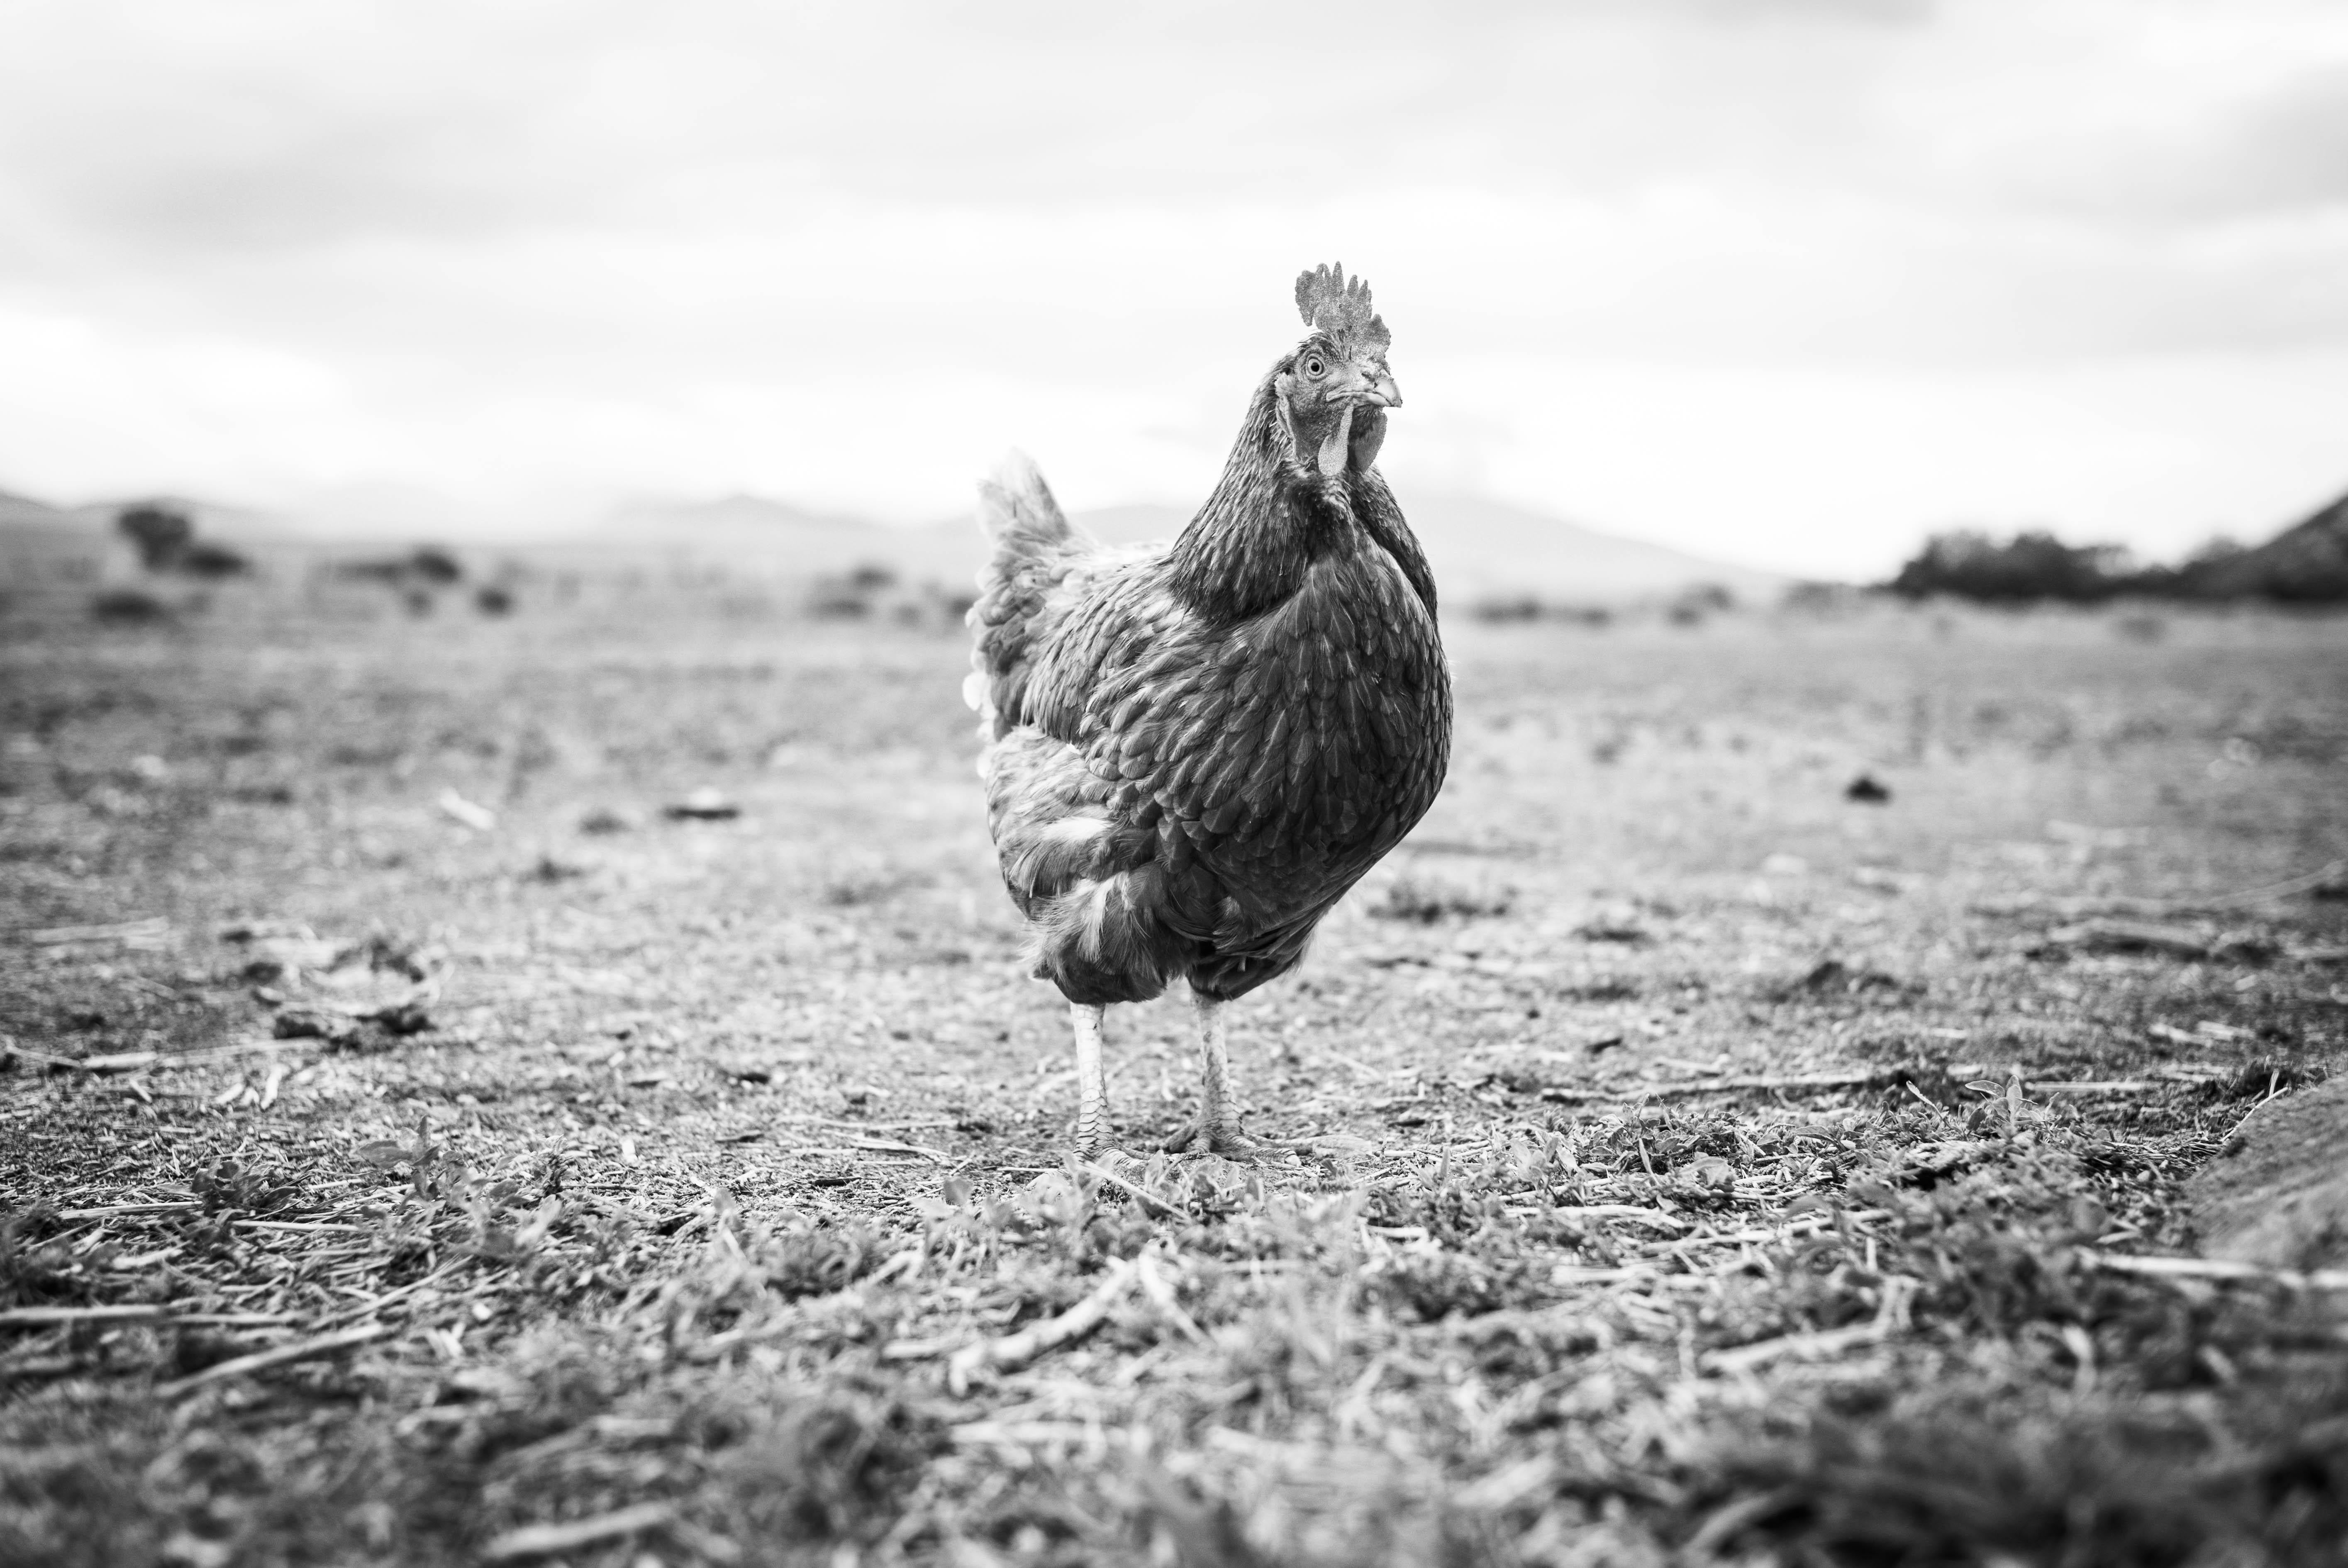 Rooster, Colorado - Black & White Photo of A Cocky Rooster in a Sparse Landscape